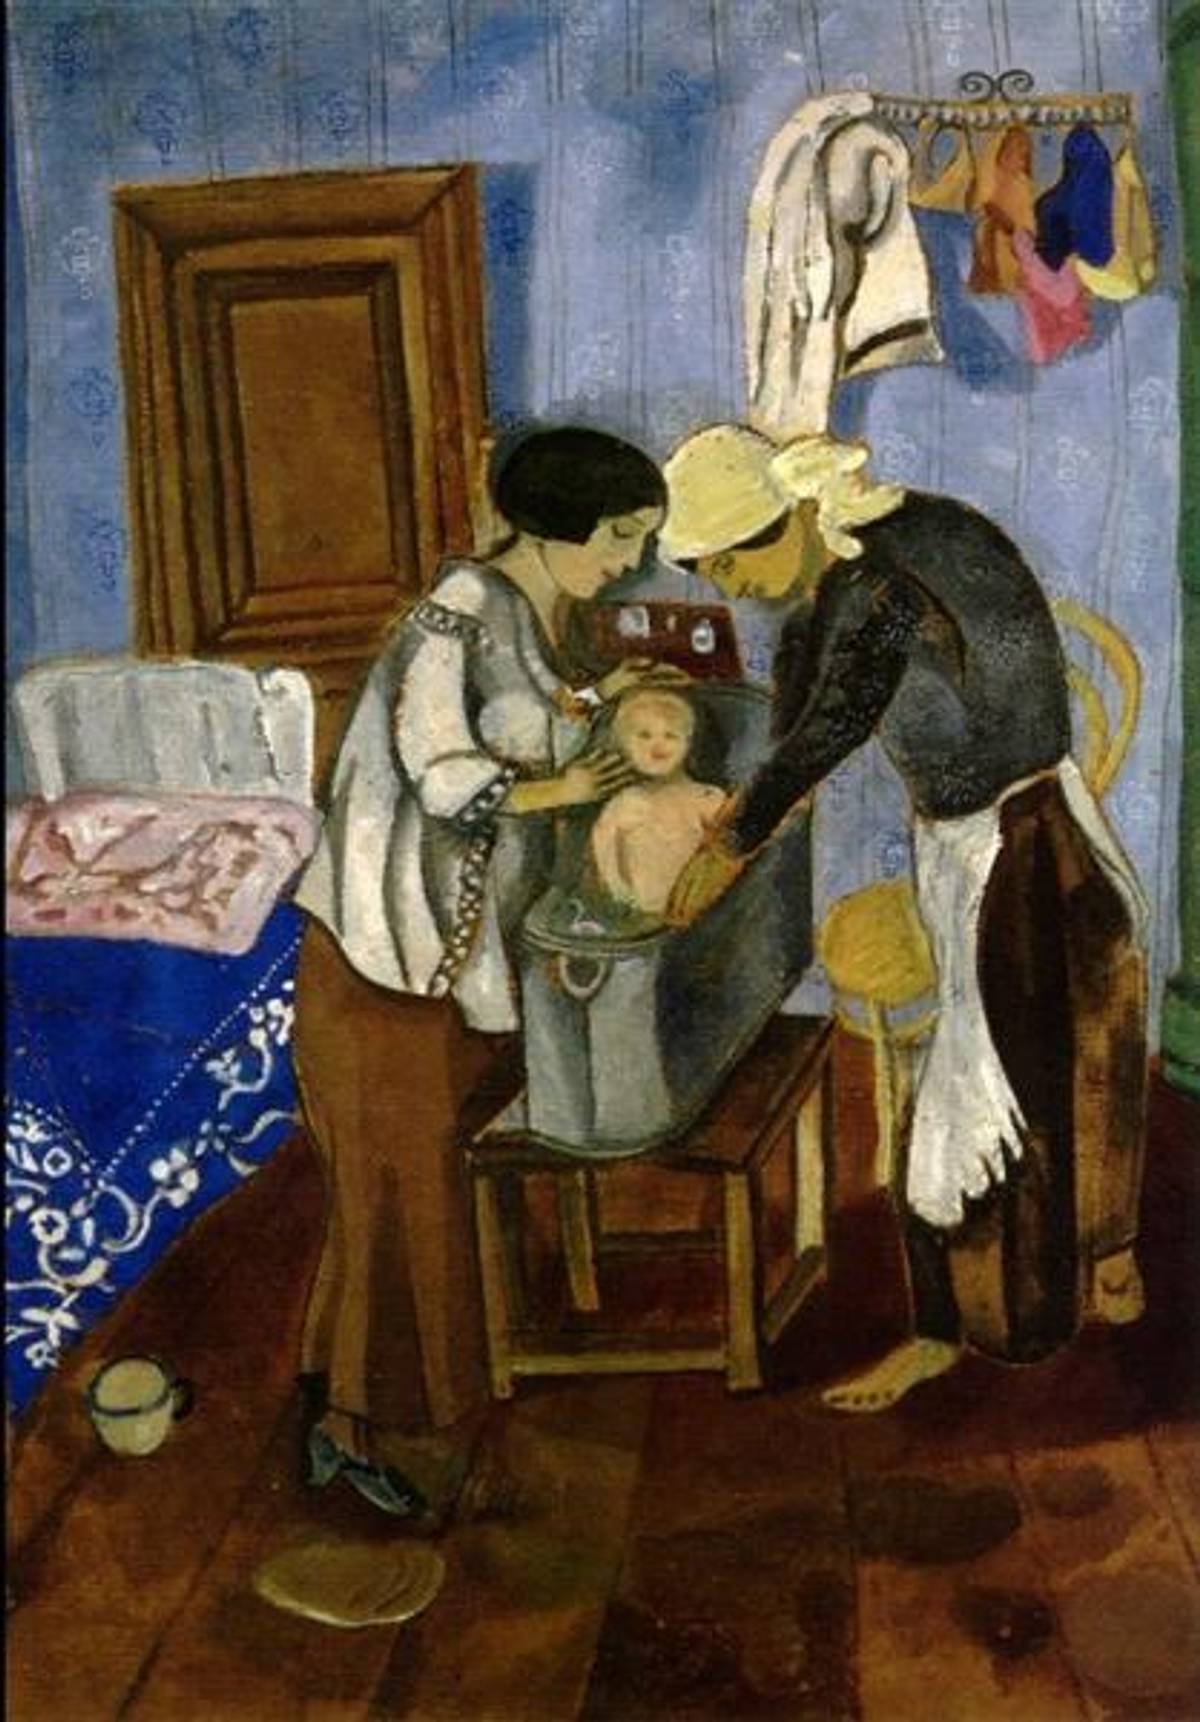 Bathing a Baby, 1916, tempera on paper, on cardboard.